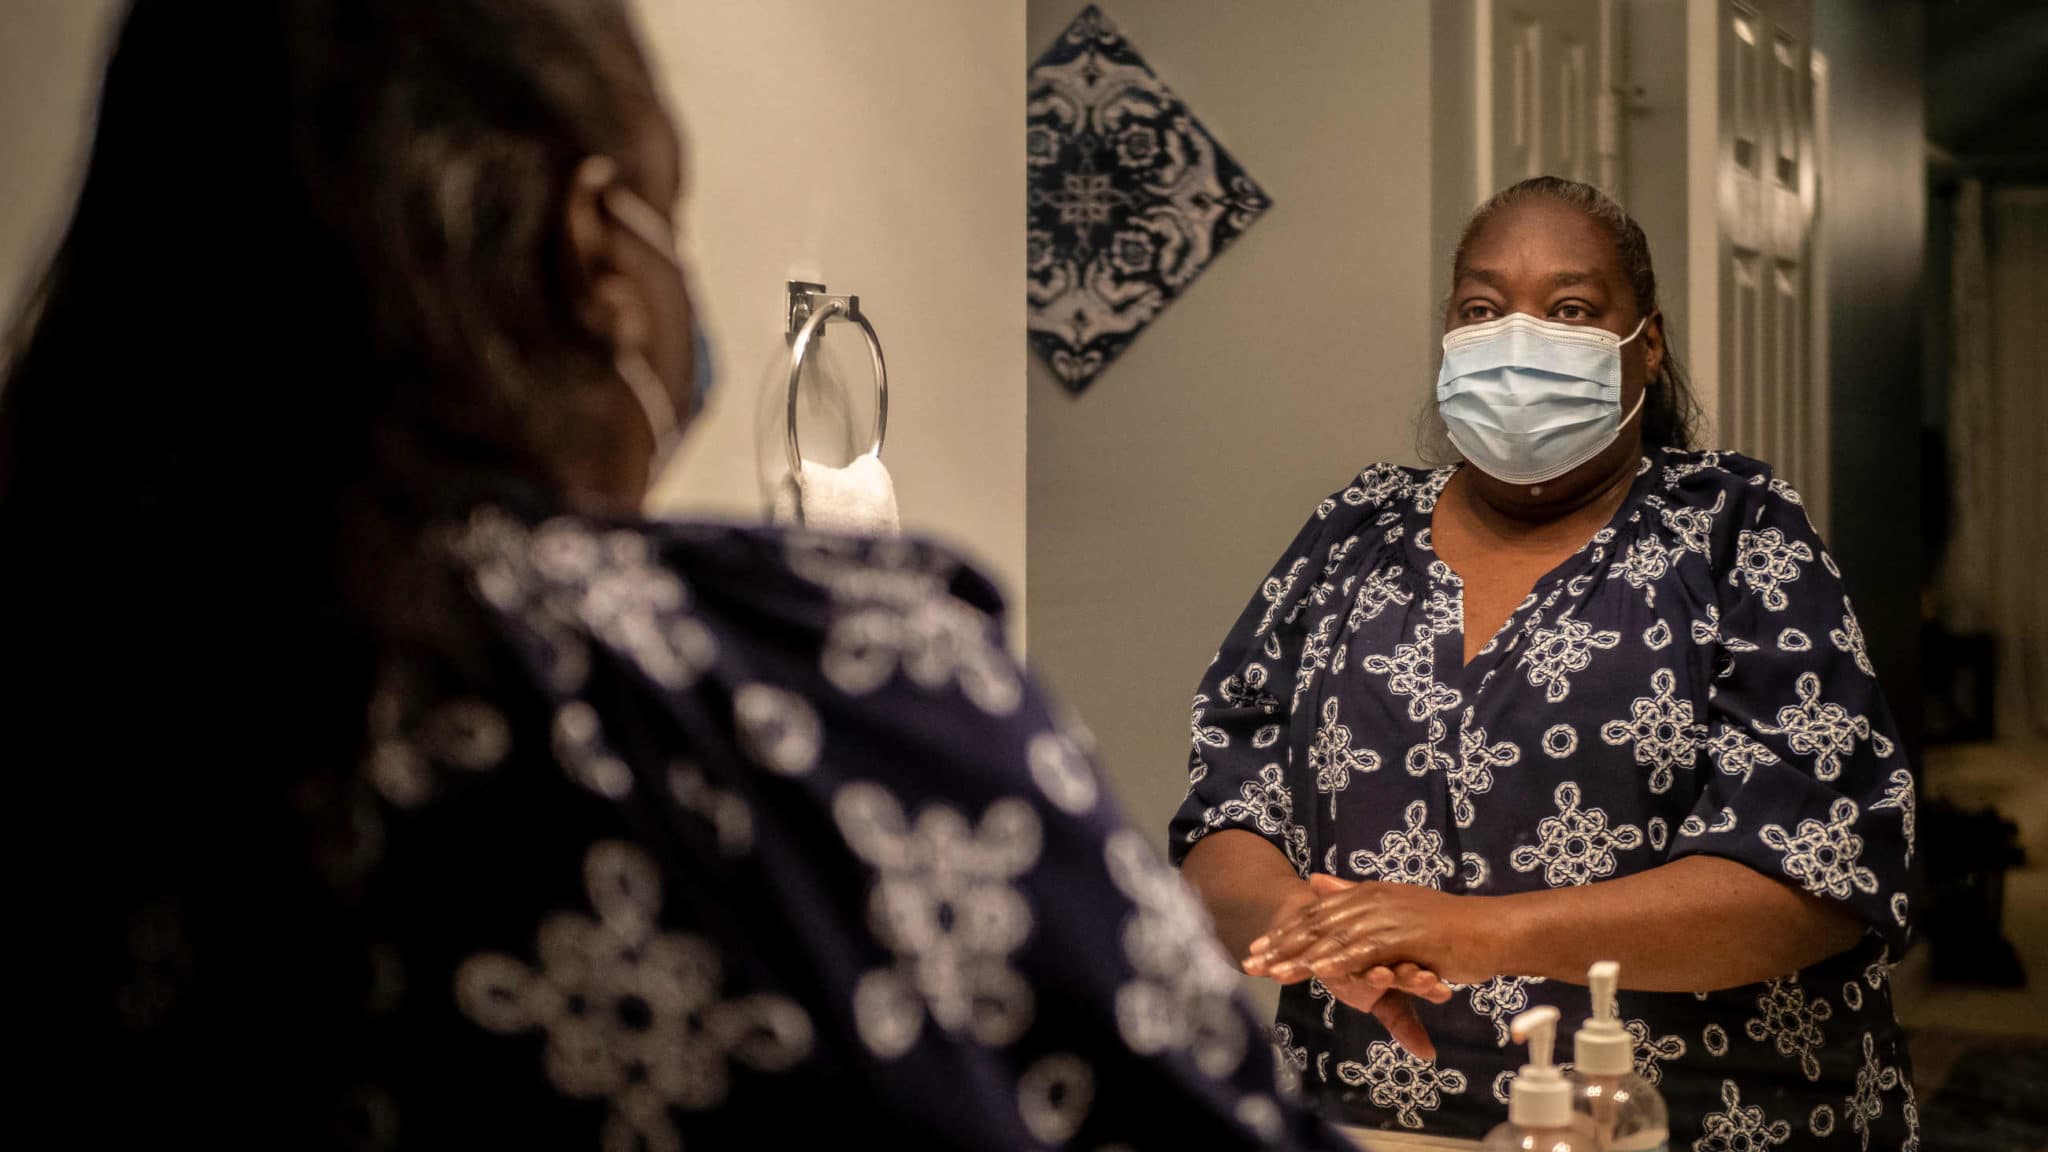 Traci Evans-Simmons has been on dialysis for three years and waiting for a kidney transplant since early 2019. She is considering getting a kidney transplant from a hepatitis C-positive donor.